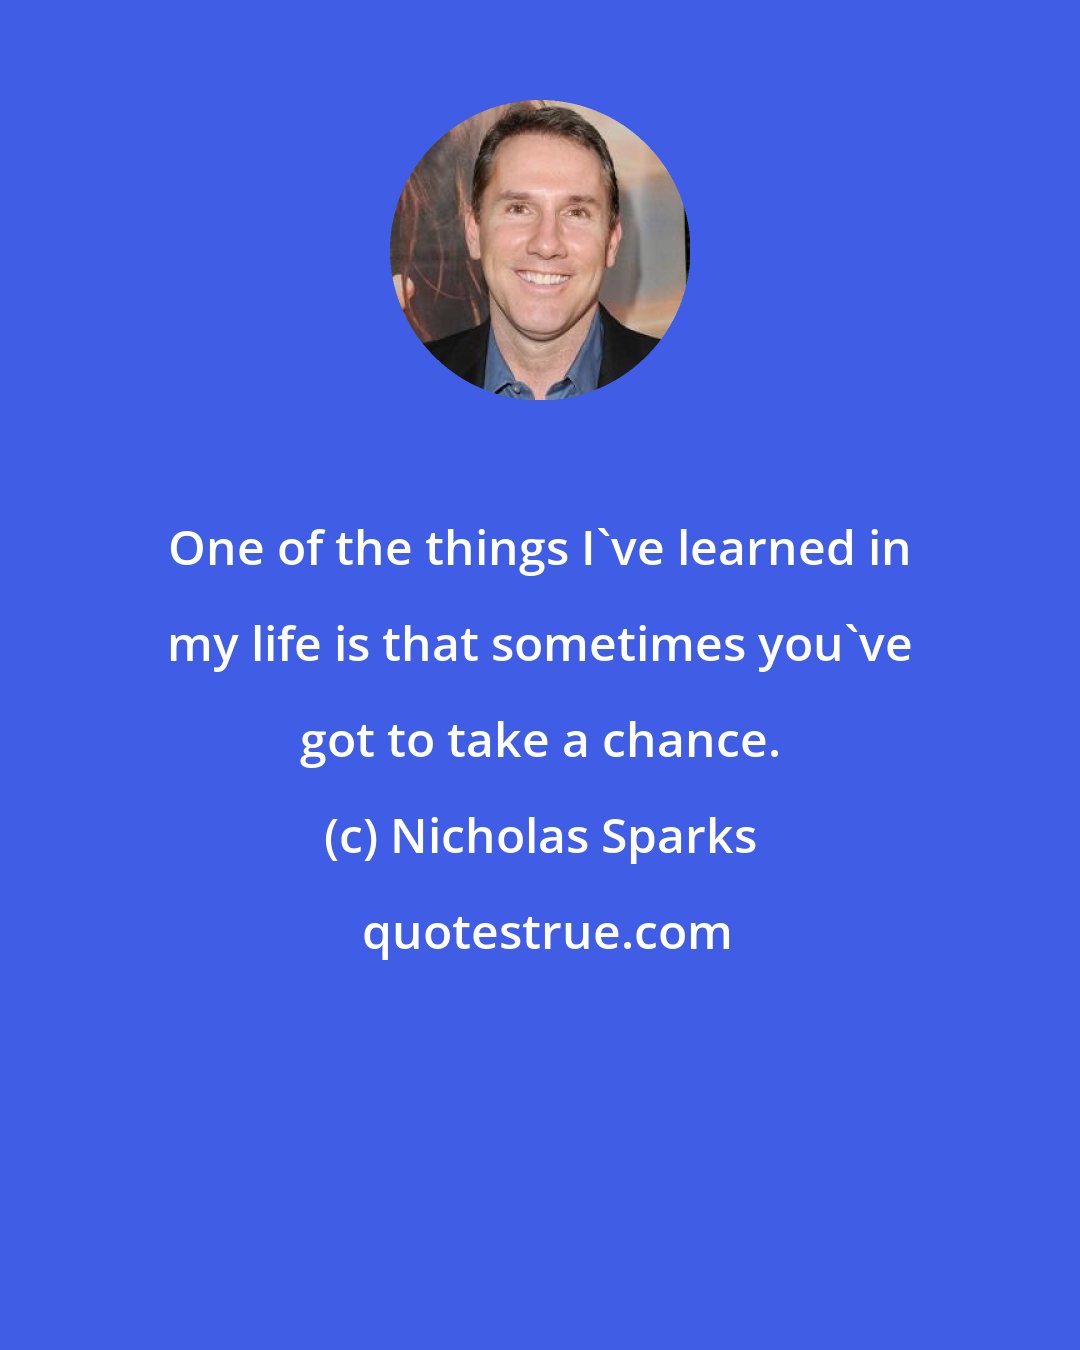 Nicholas Sparks: One of the things I've learned in my life is that sometimes you've got to take a chance.